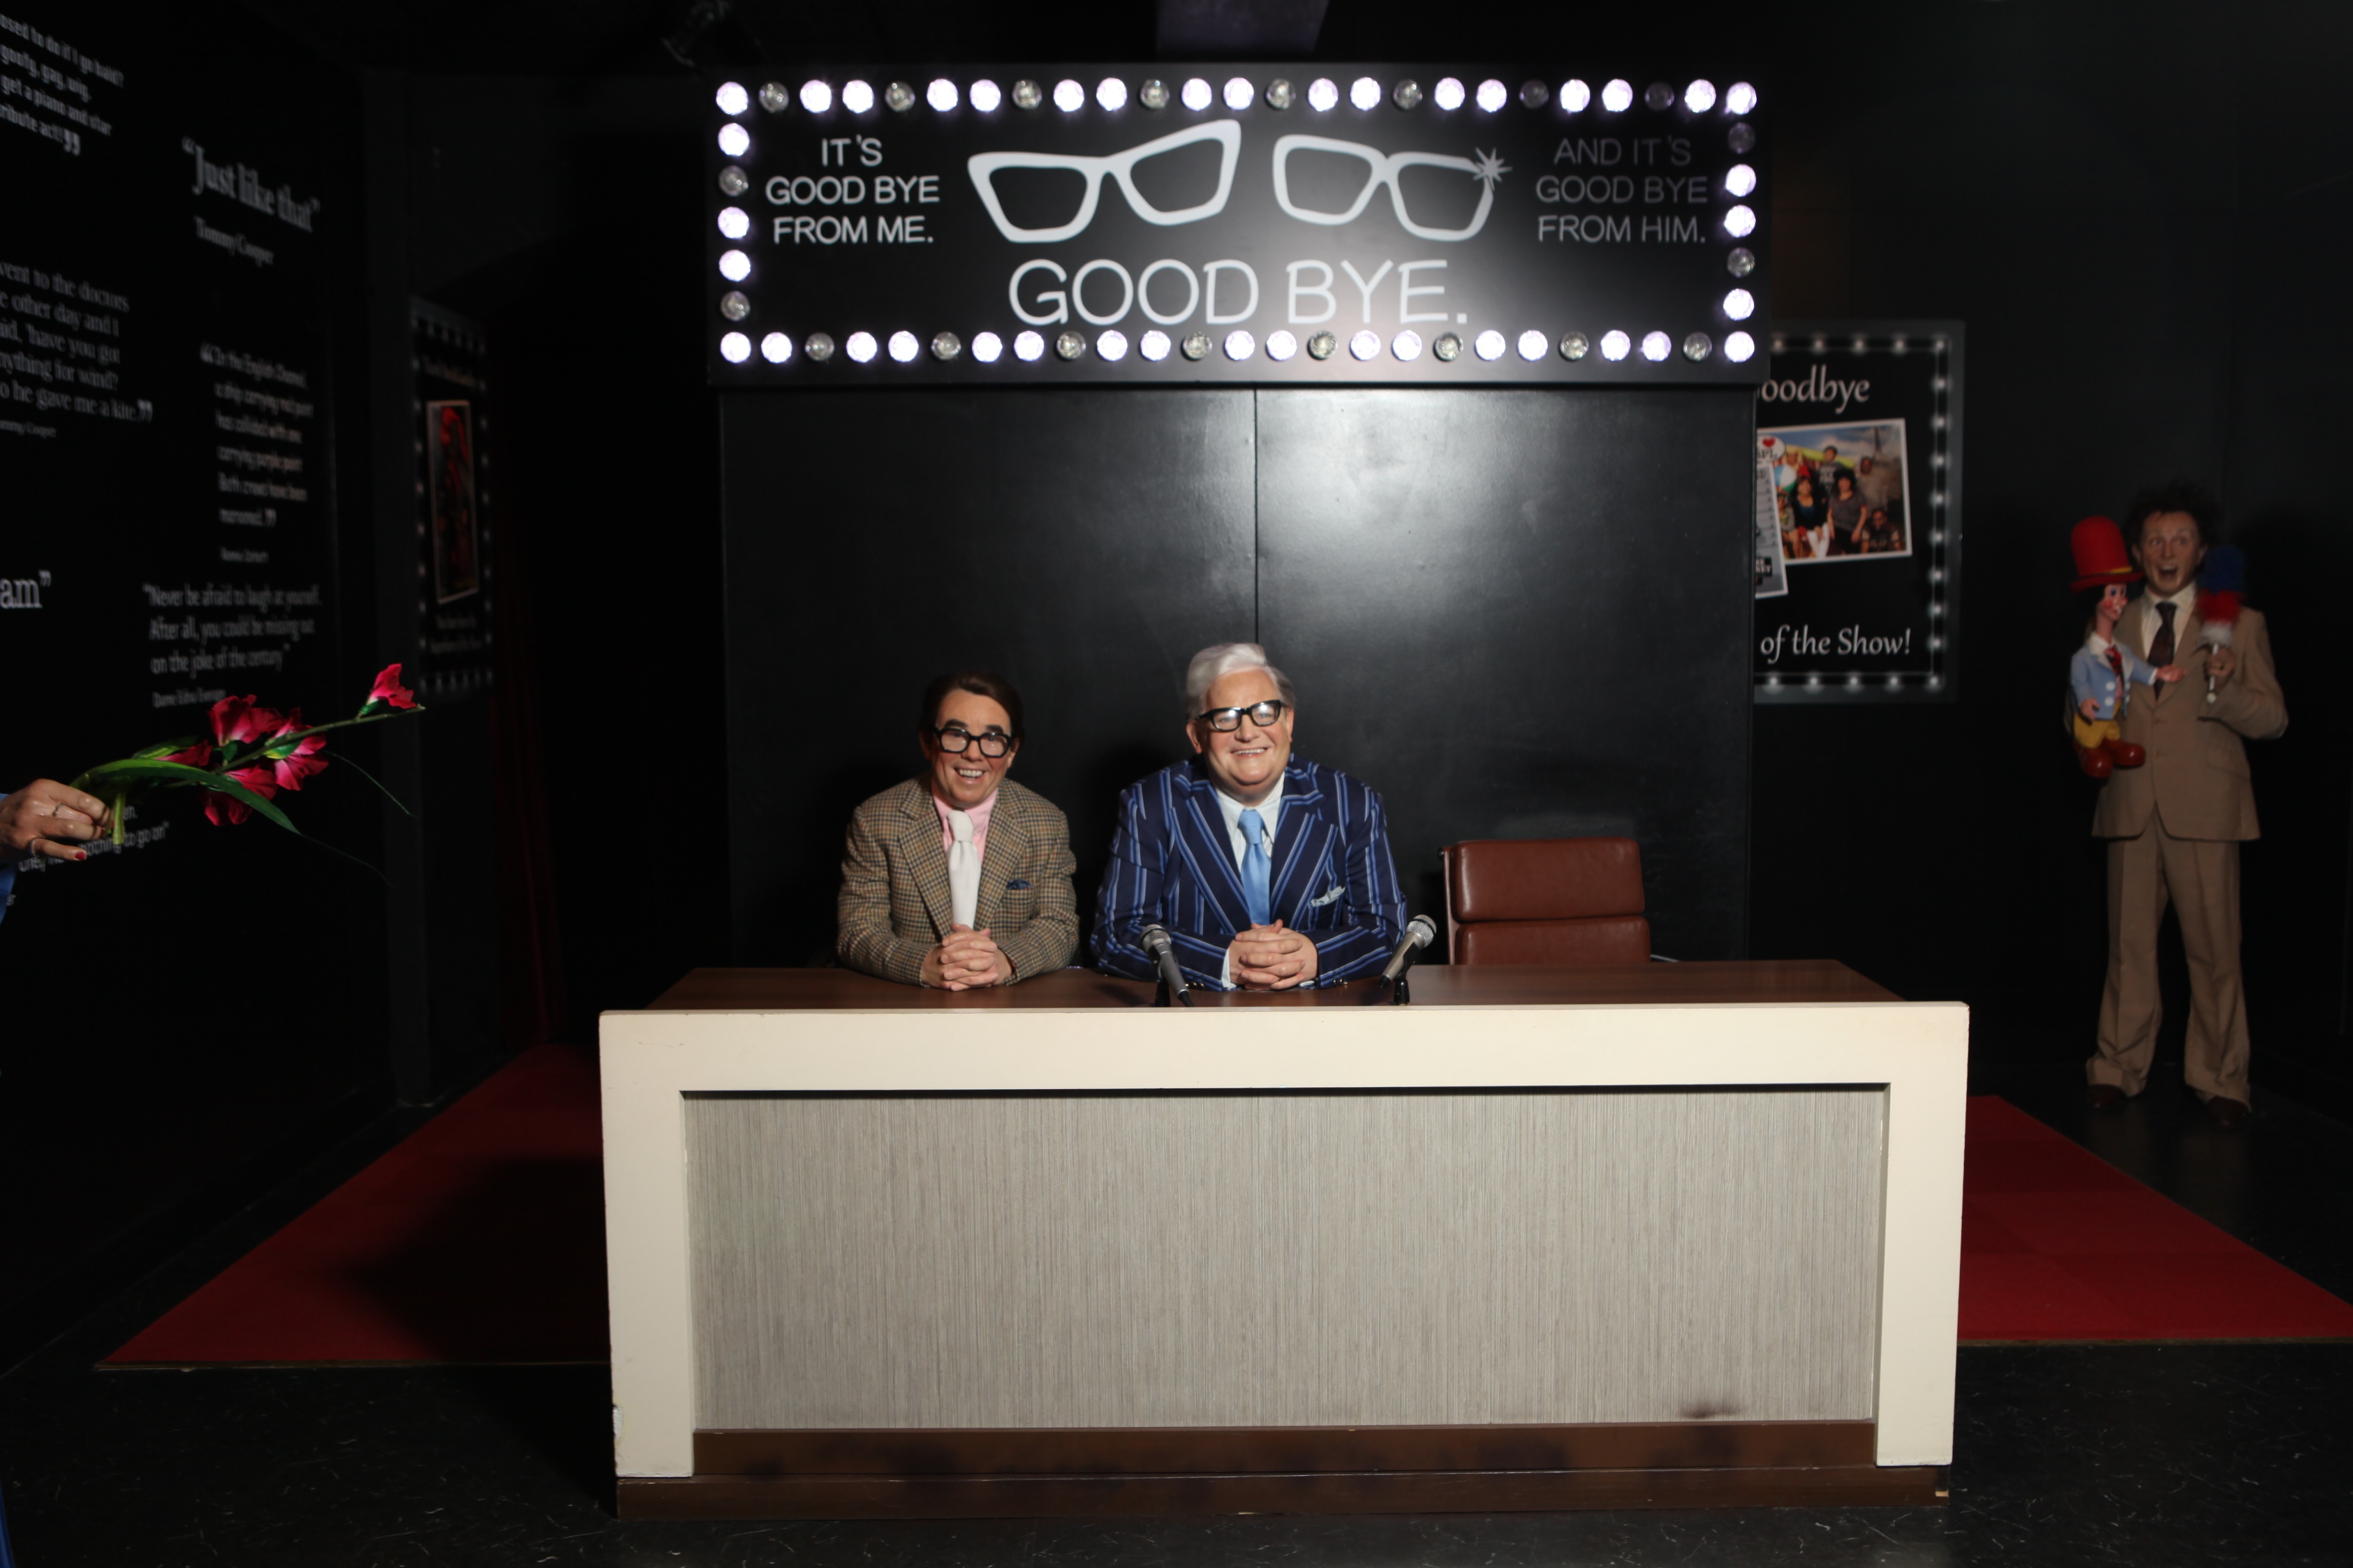 The Two Ronnie's Wax figure at Madame Tussauds Blackpool